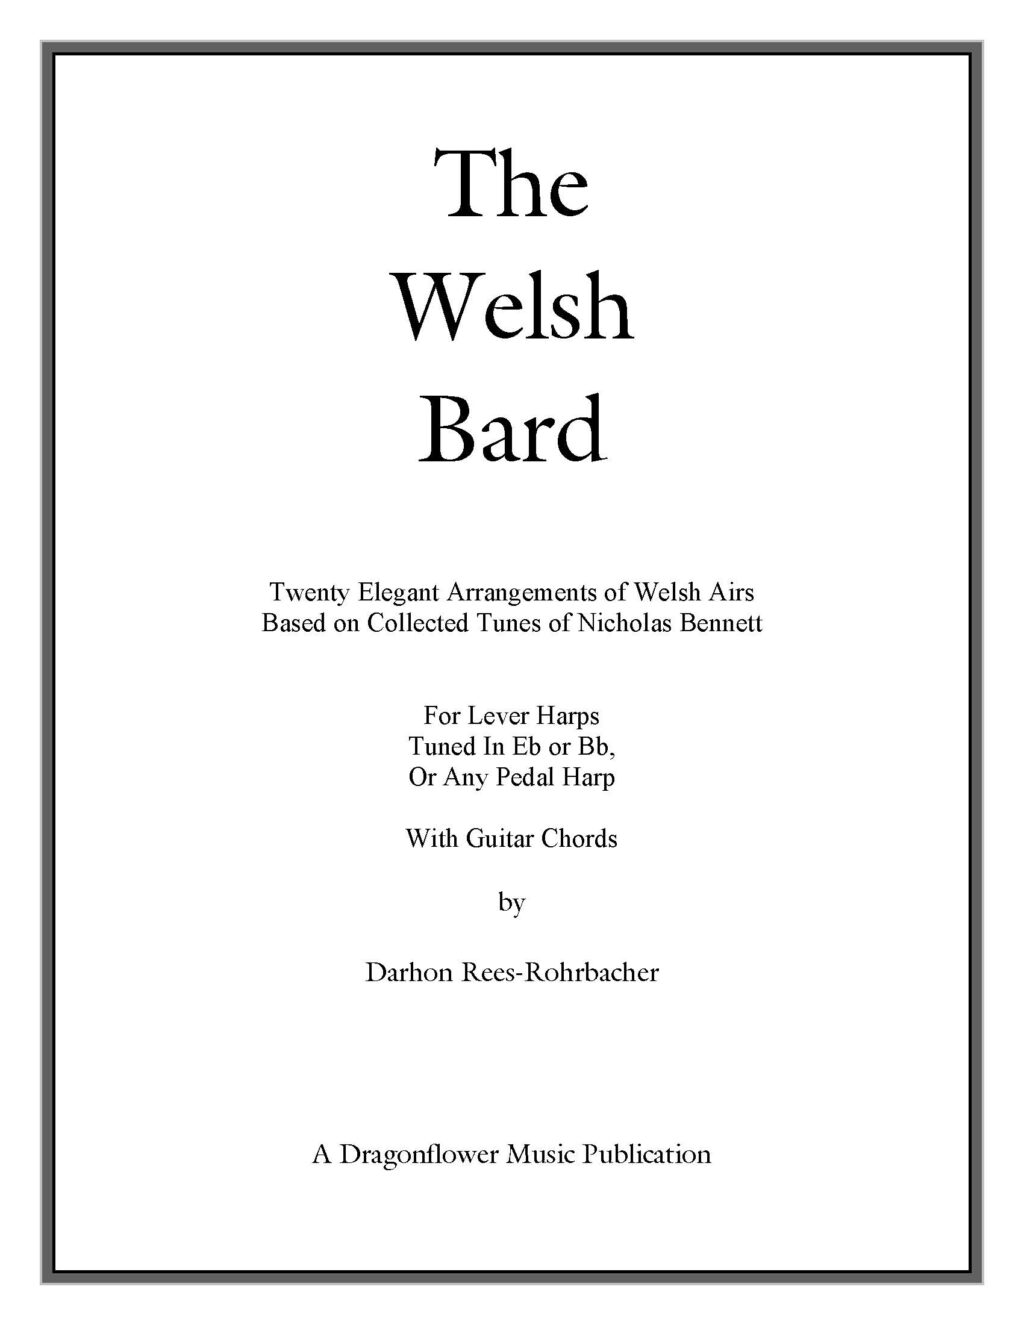 The Welsh Bard by Rees-Rohrbacher Cover at folkharp.com